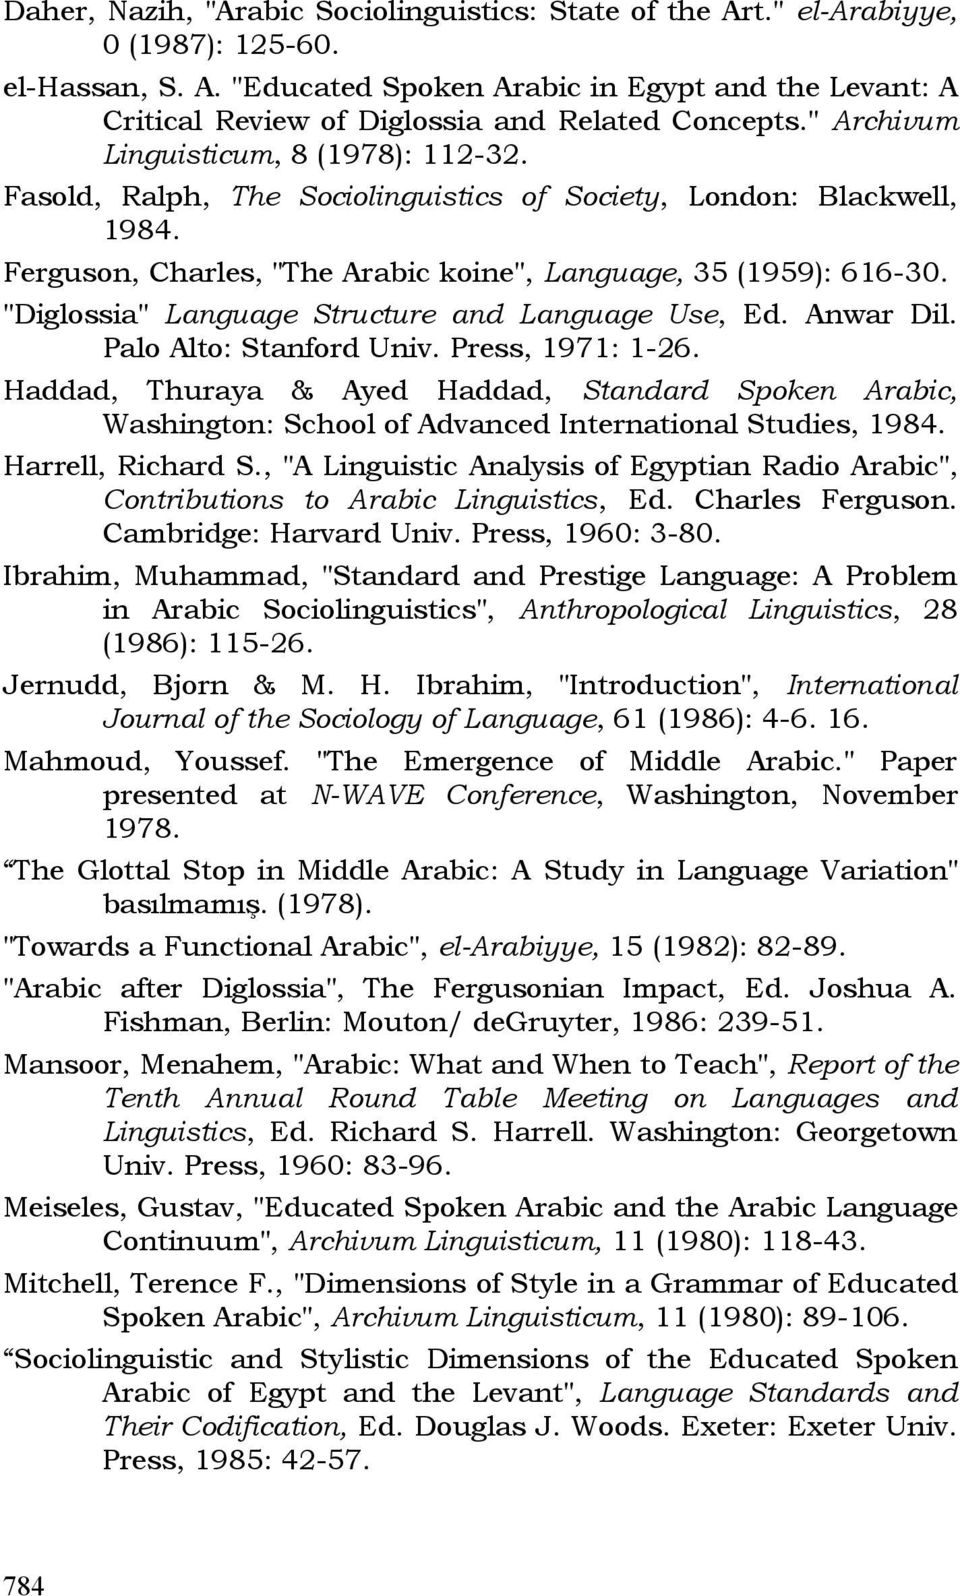 "Diglossia" Language Structure and Language Use, Ed. Anwar Dil. Palo Alto: Stanford Univ. Press, 1971: 1-26.